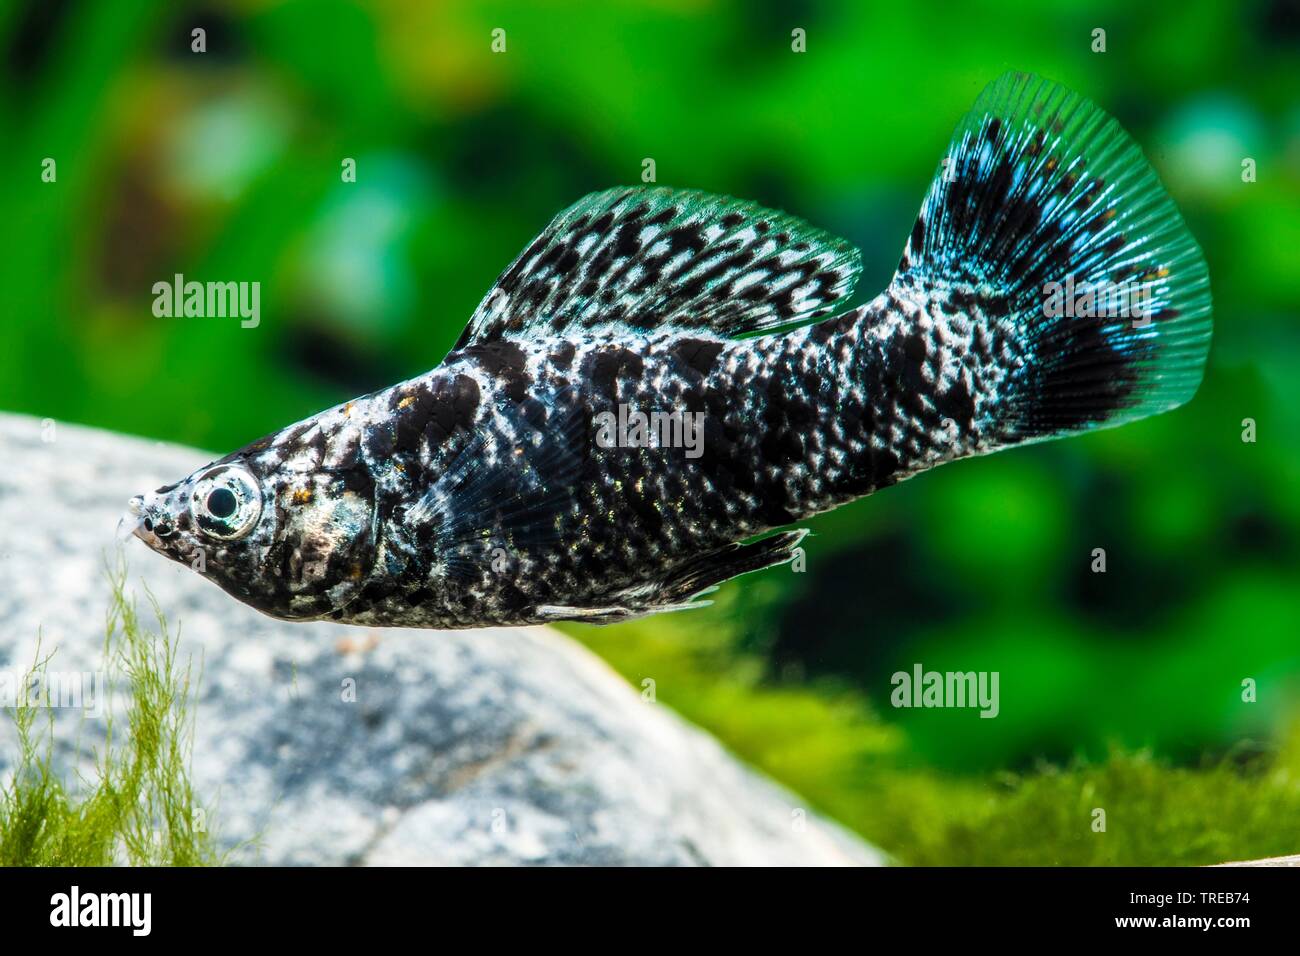 Mexican Molly, Marbled molly, Liberty Molly (Poecilia sphenops, Mollienesia sphenops), swimming, side view Stock Photo